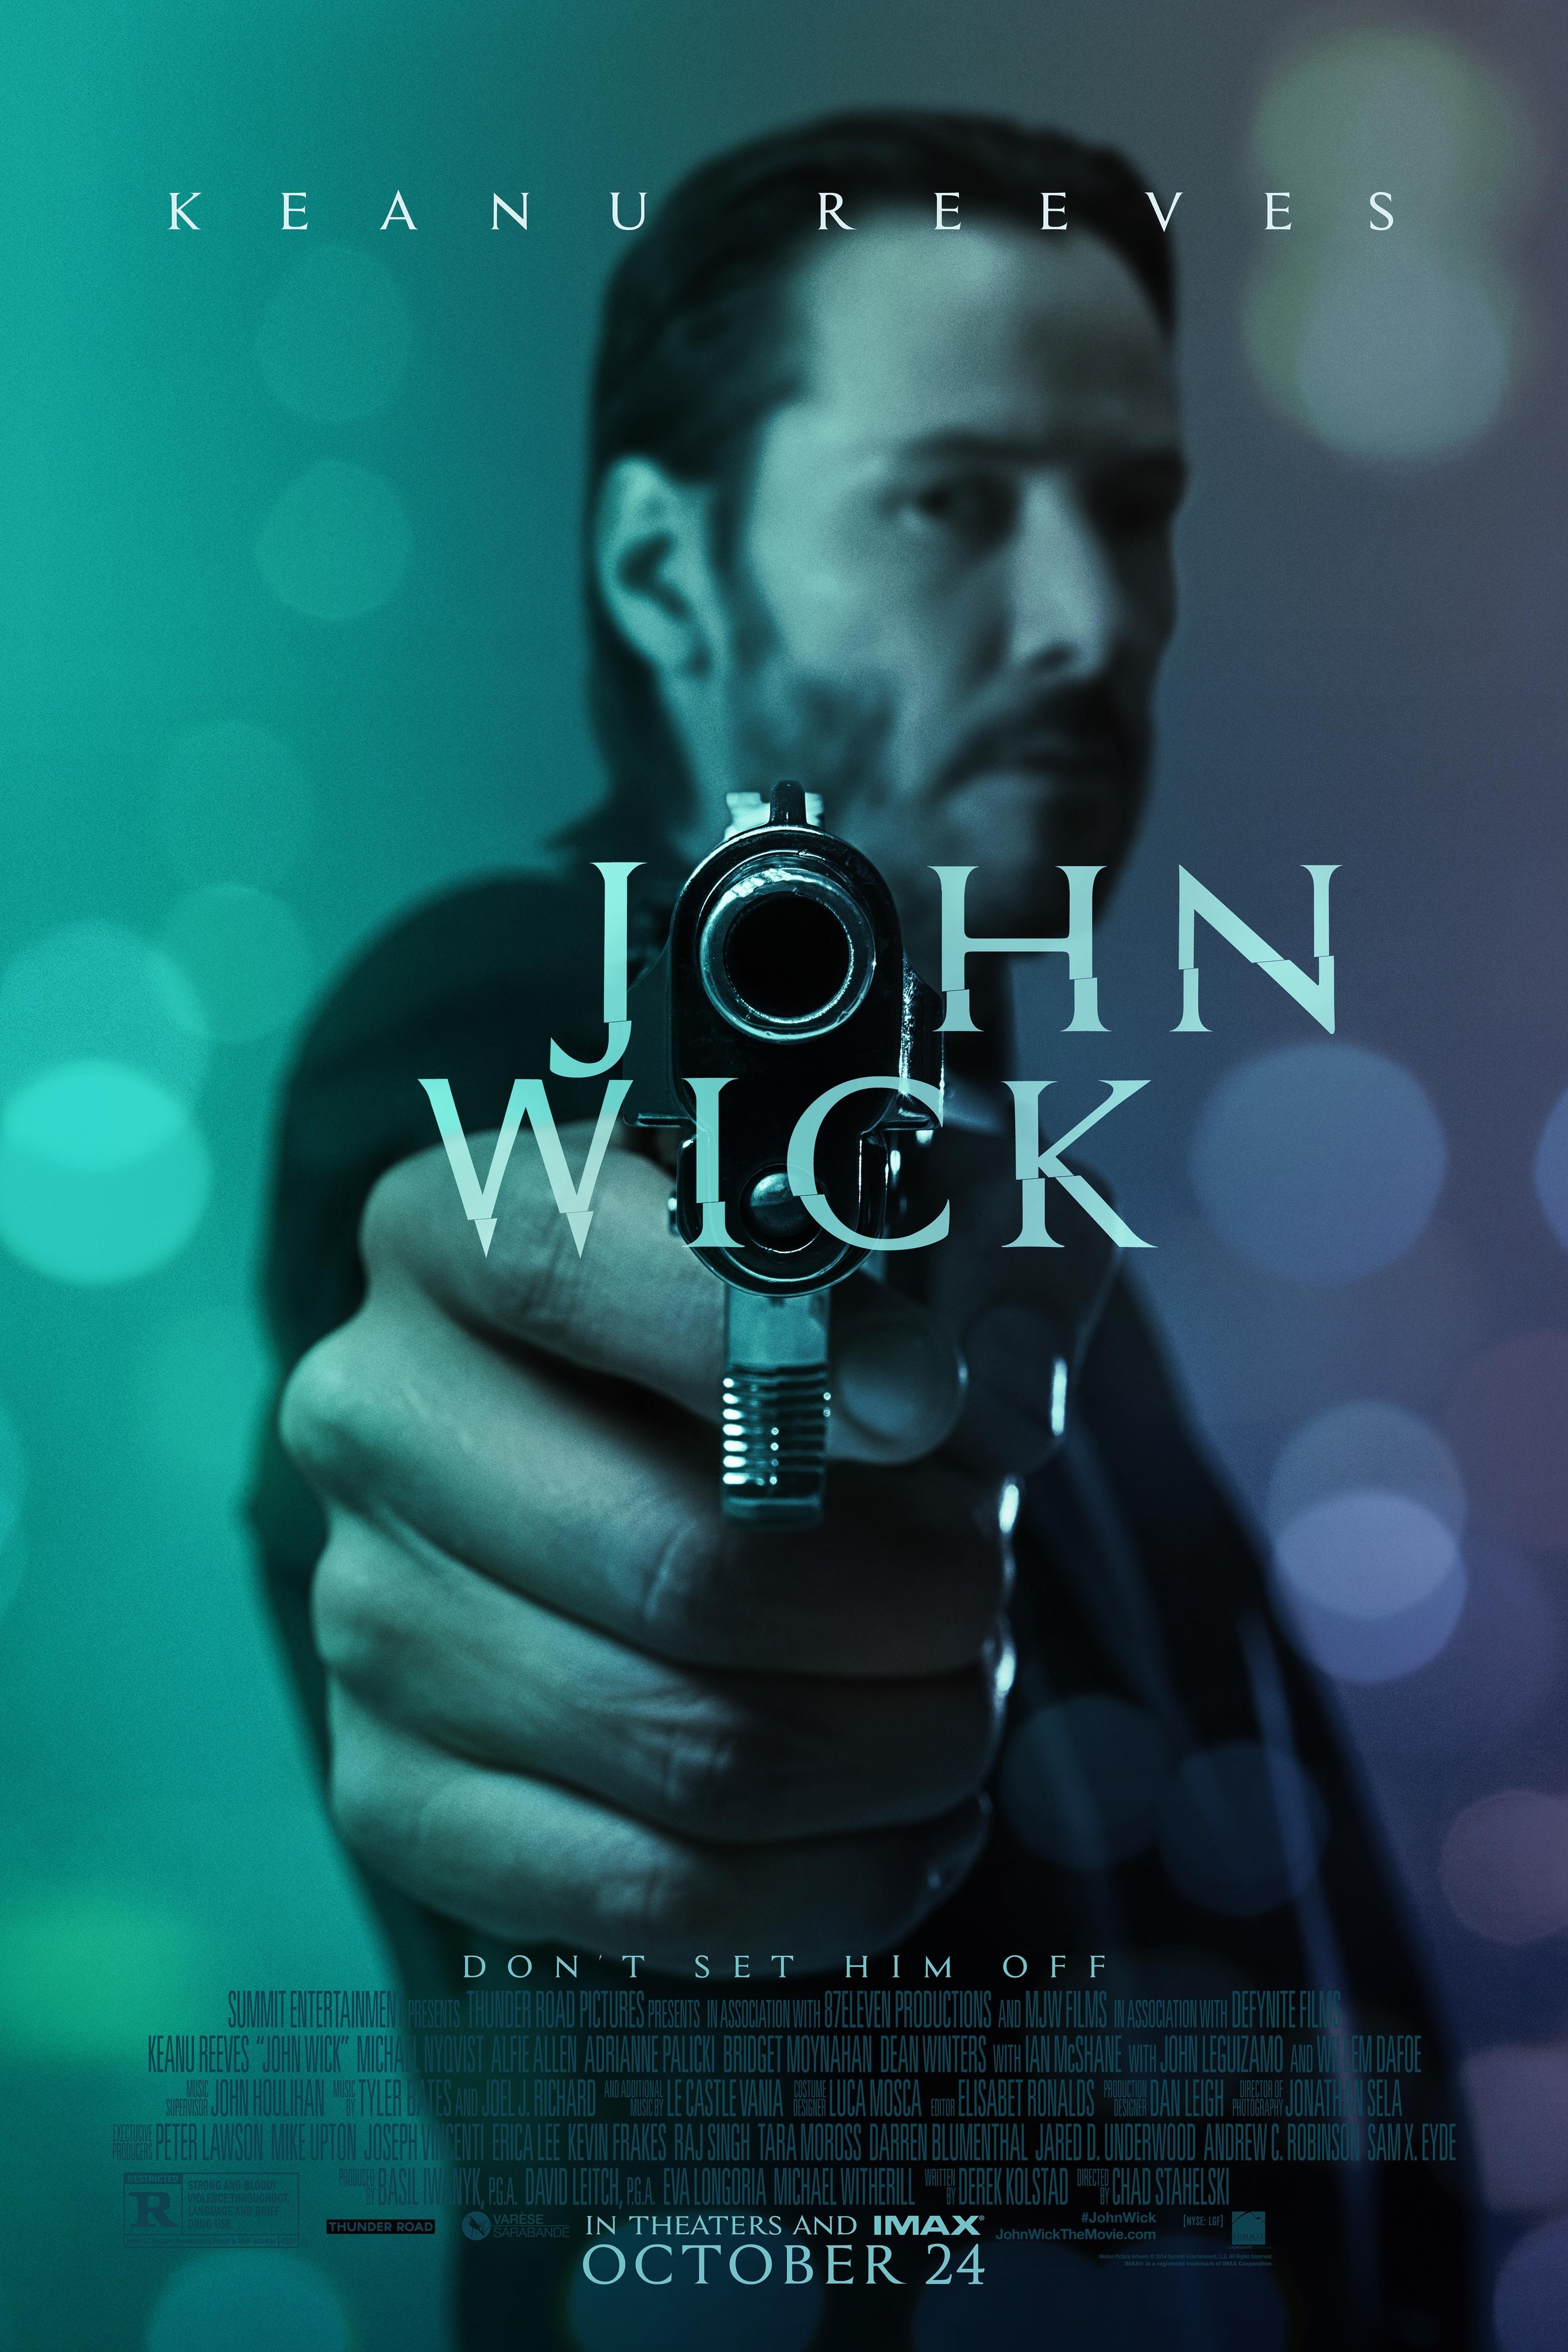 John Wick 4 Movie Review: Even more stylish, thrilling